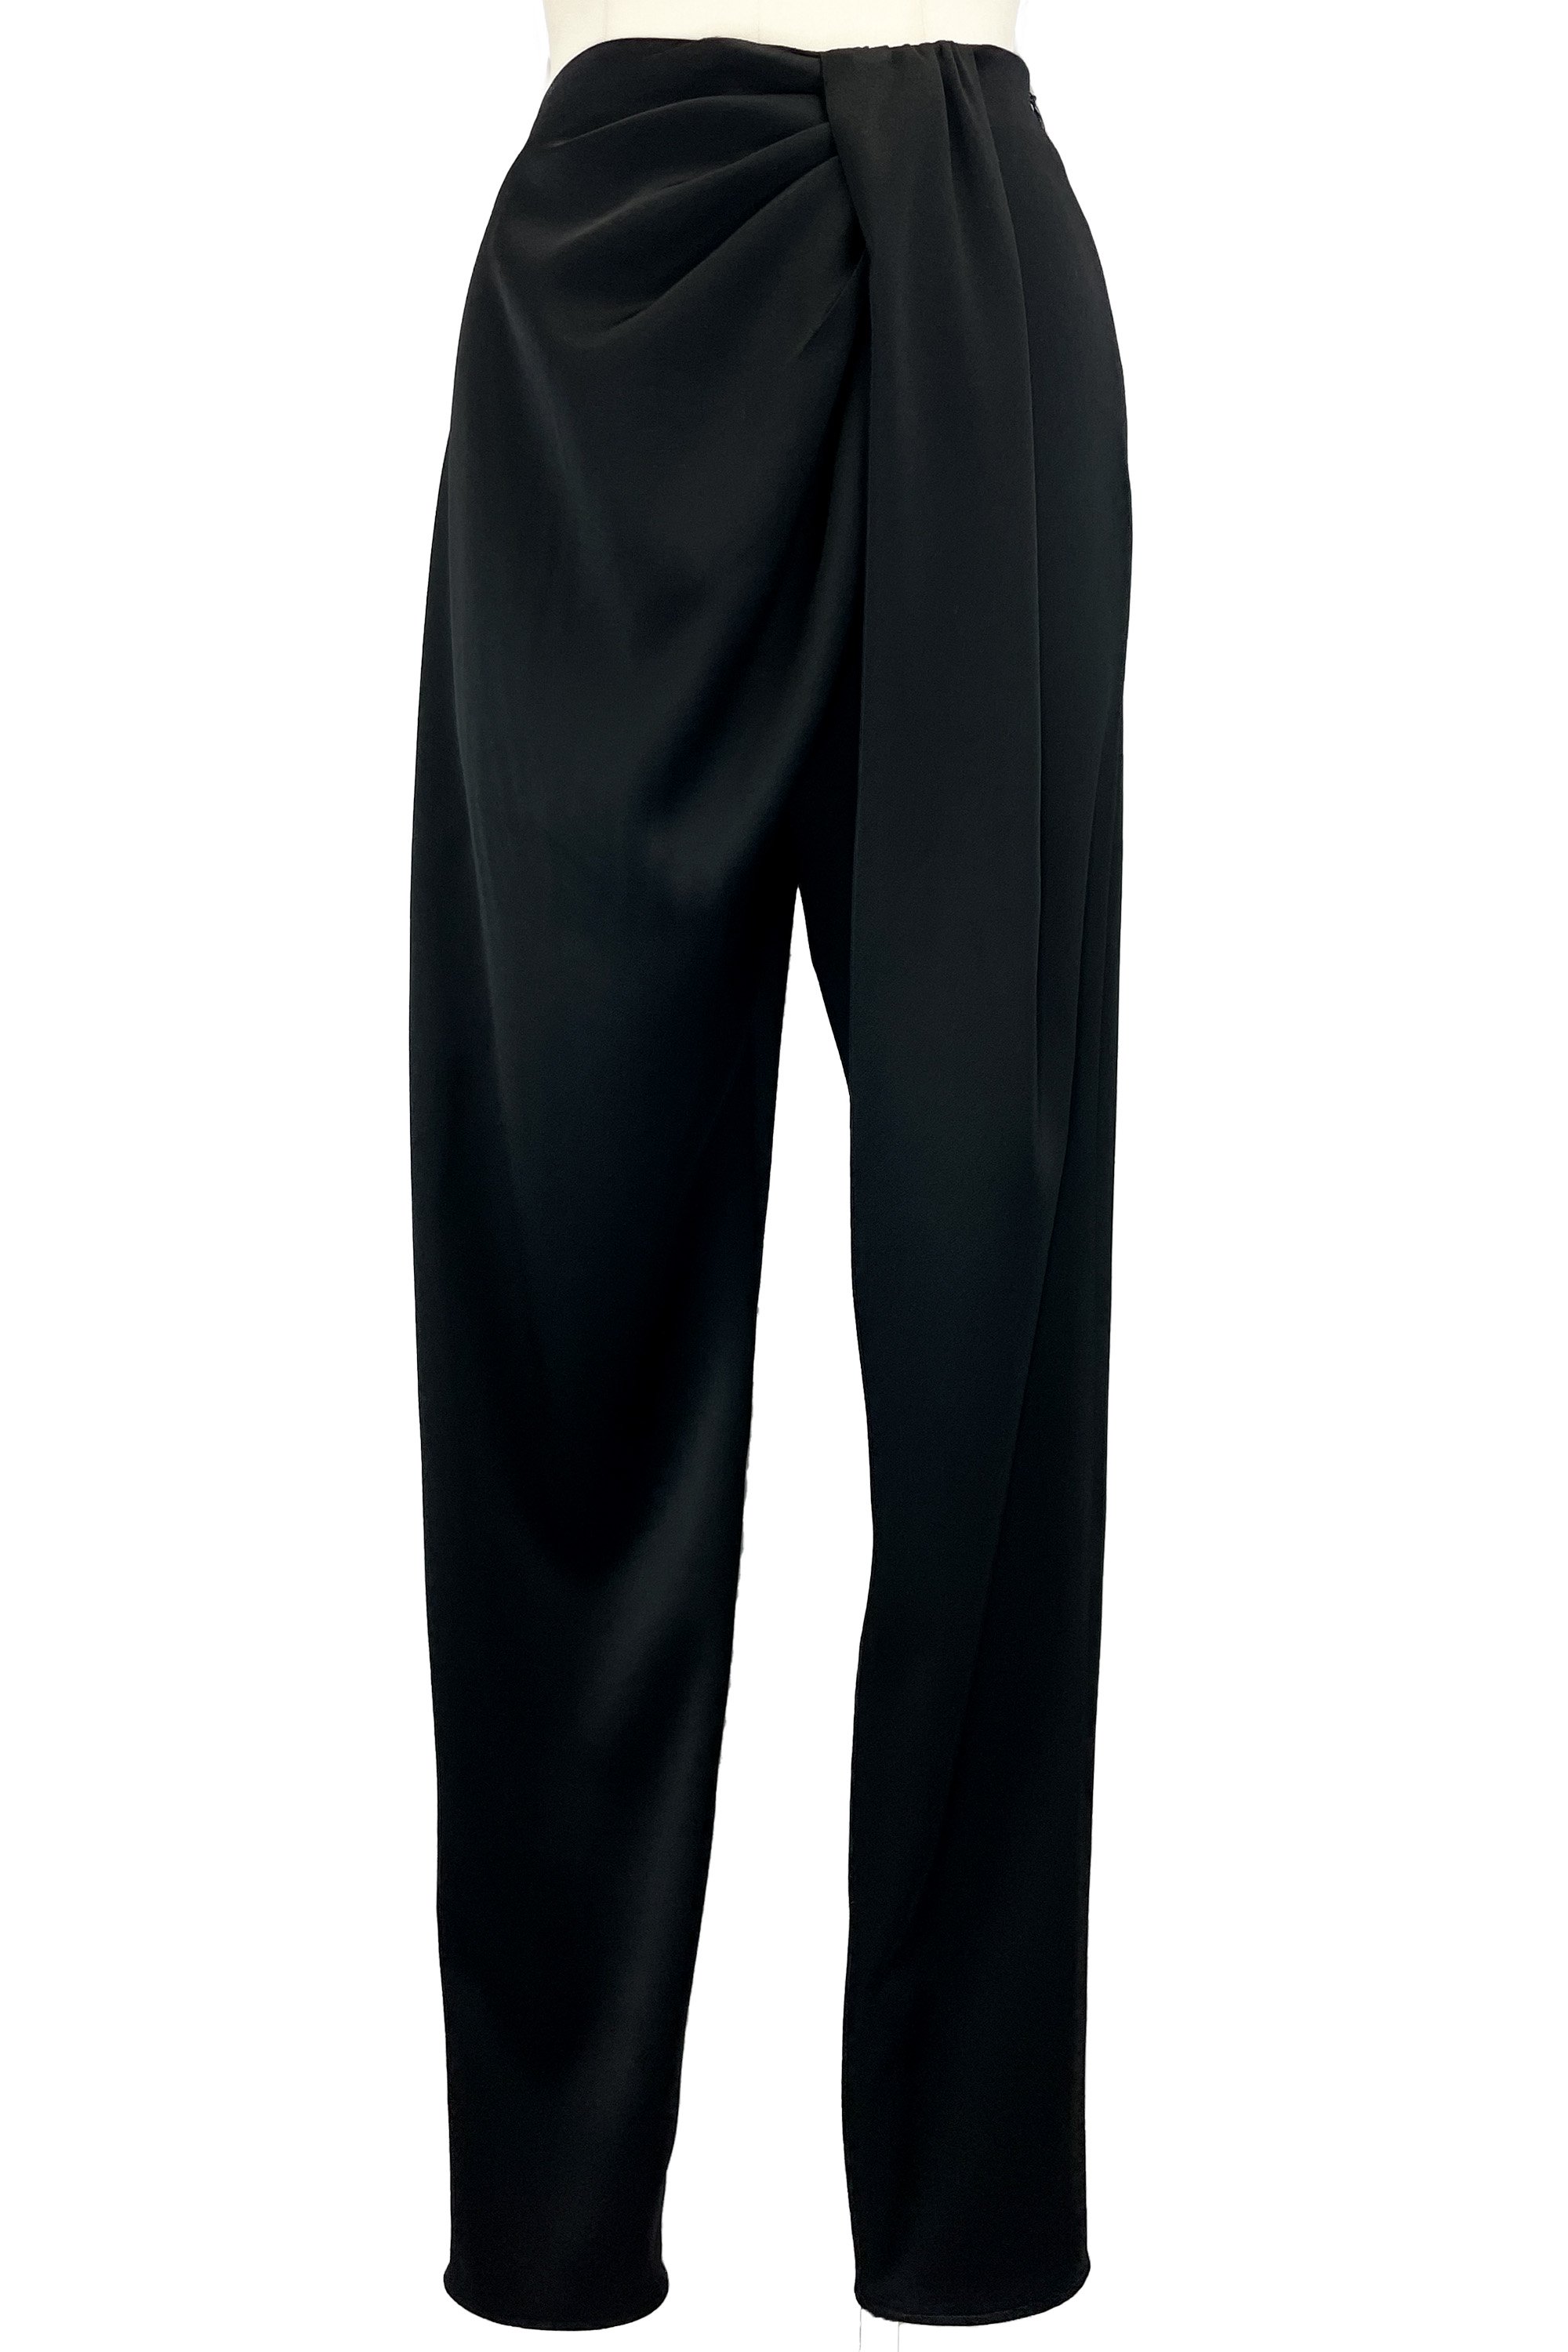 <img class='new_mark_img1' src='https://img.shop-pro.jp/img/new/icons47.gif' style='border:none;display:inline;margin:0px;padding:0px;width:auto;' />f's6  original Drape trousers